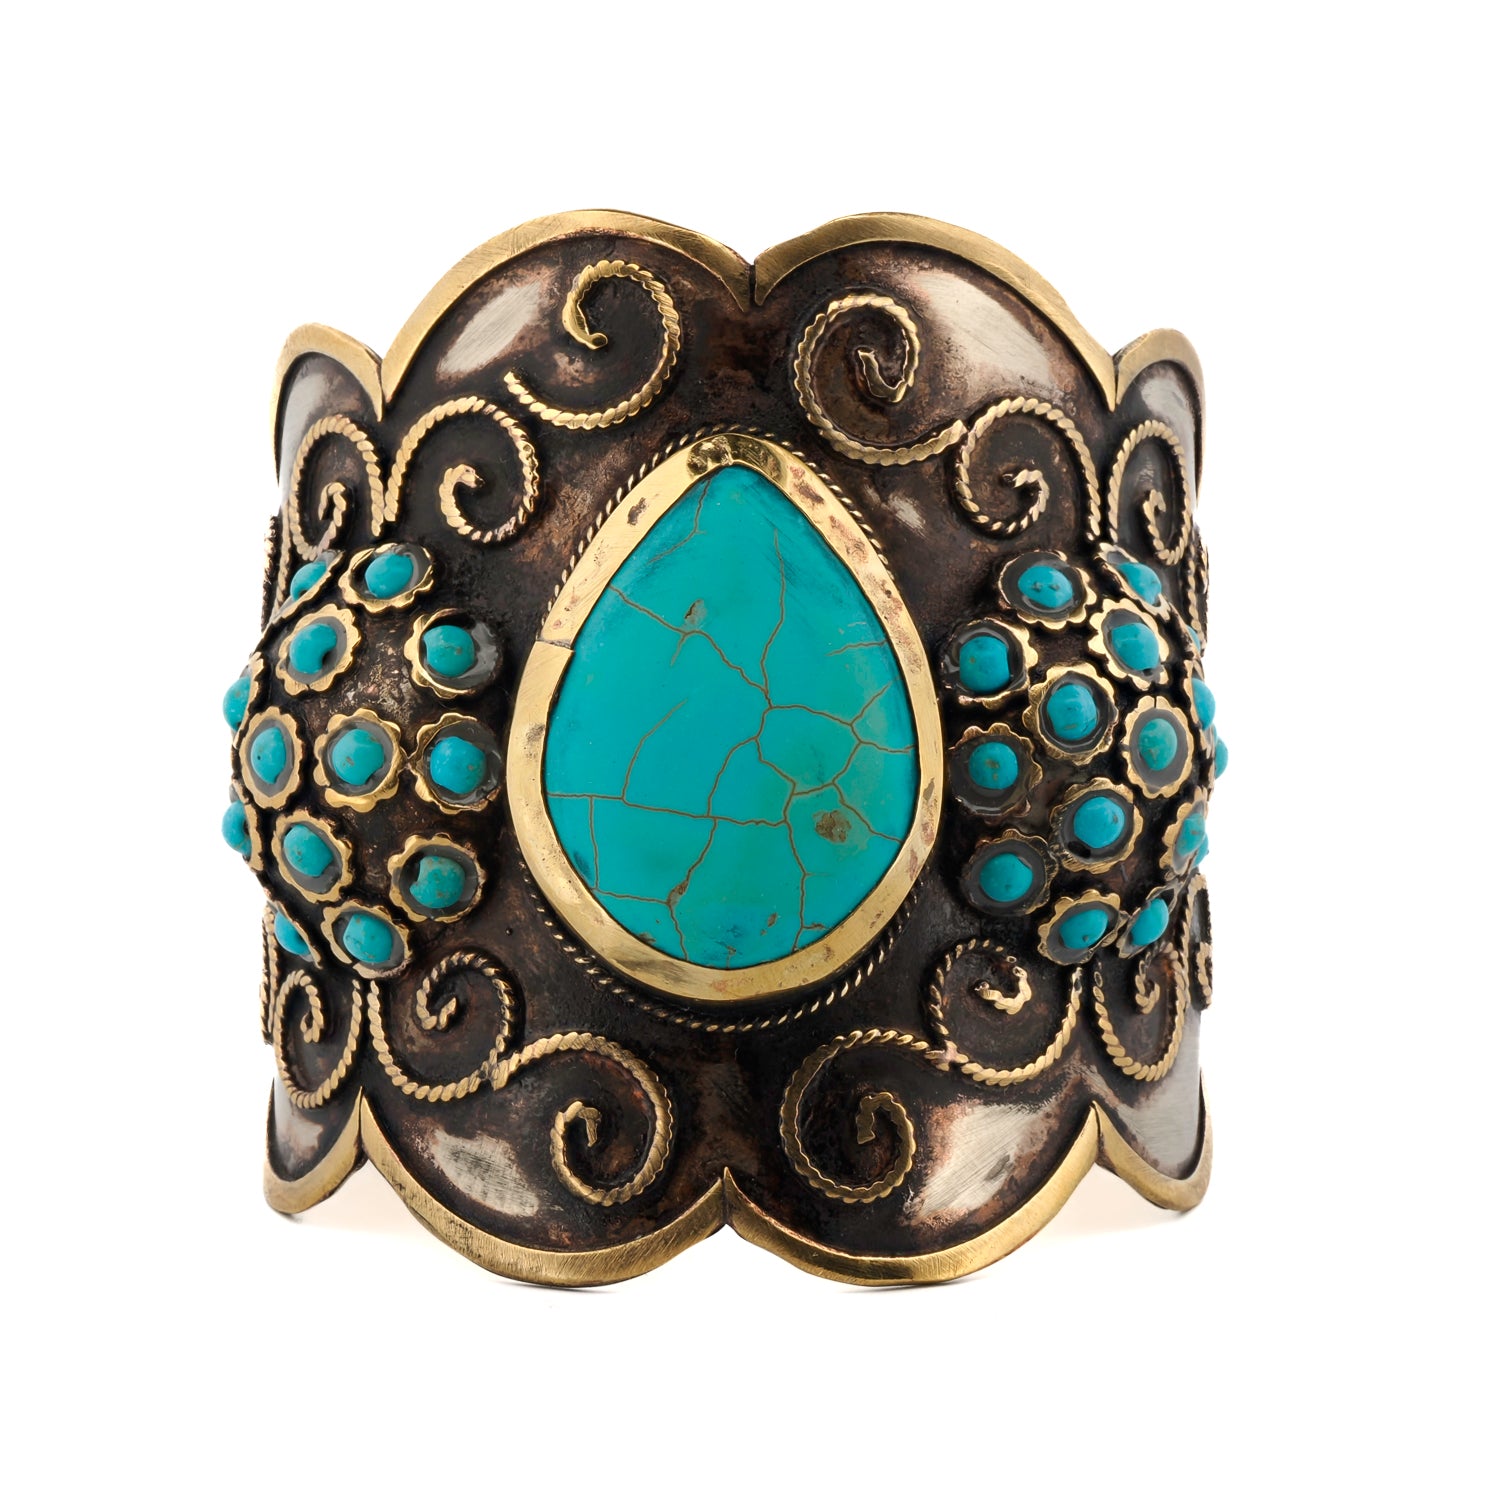 Teardrop-shaped turquoise gemstone with vintage silver and gold-plated designs